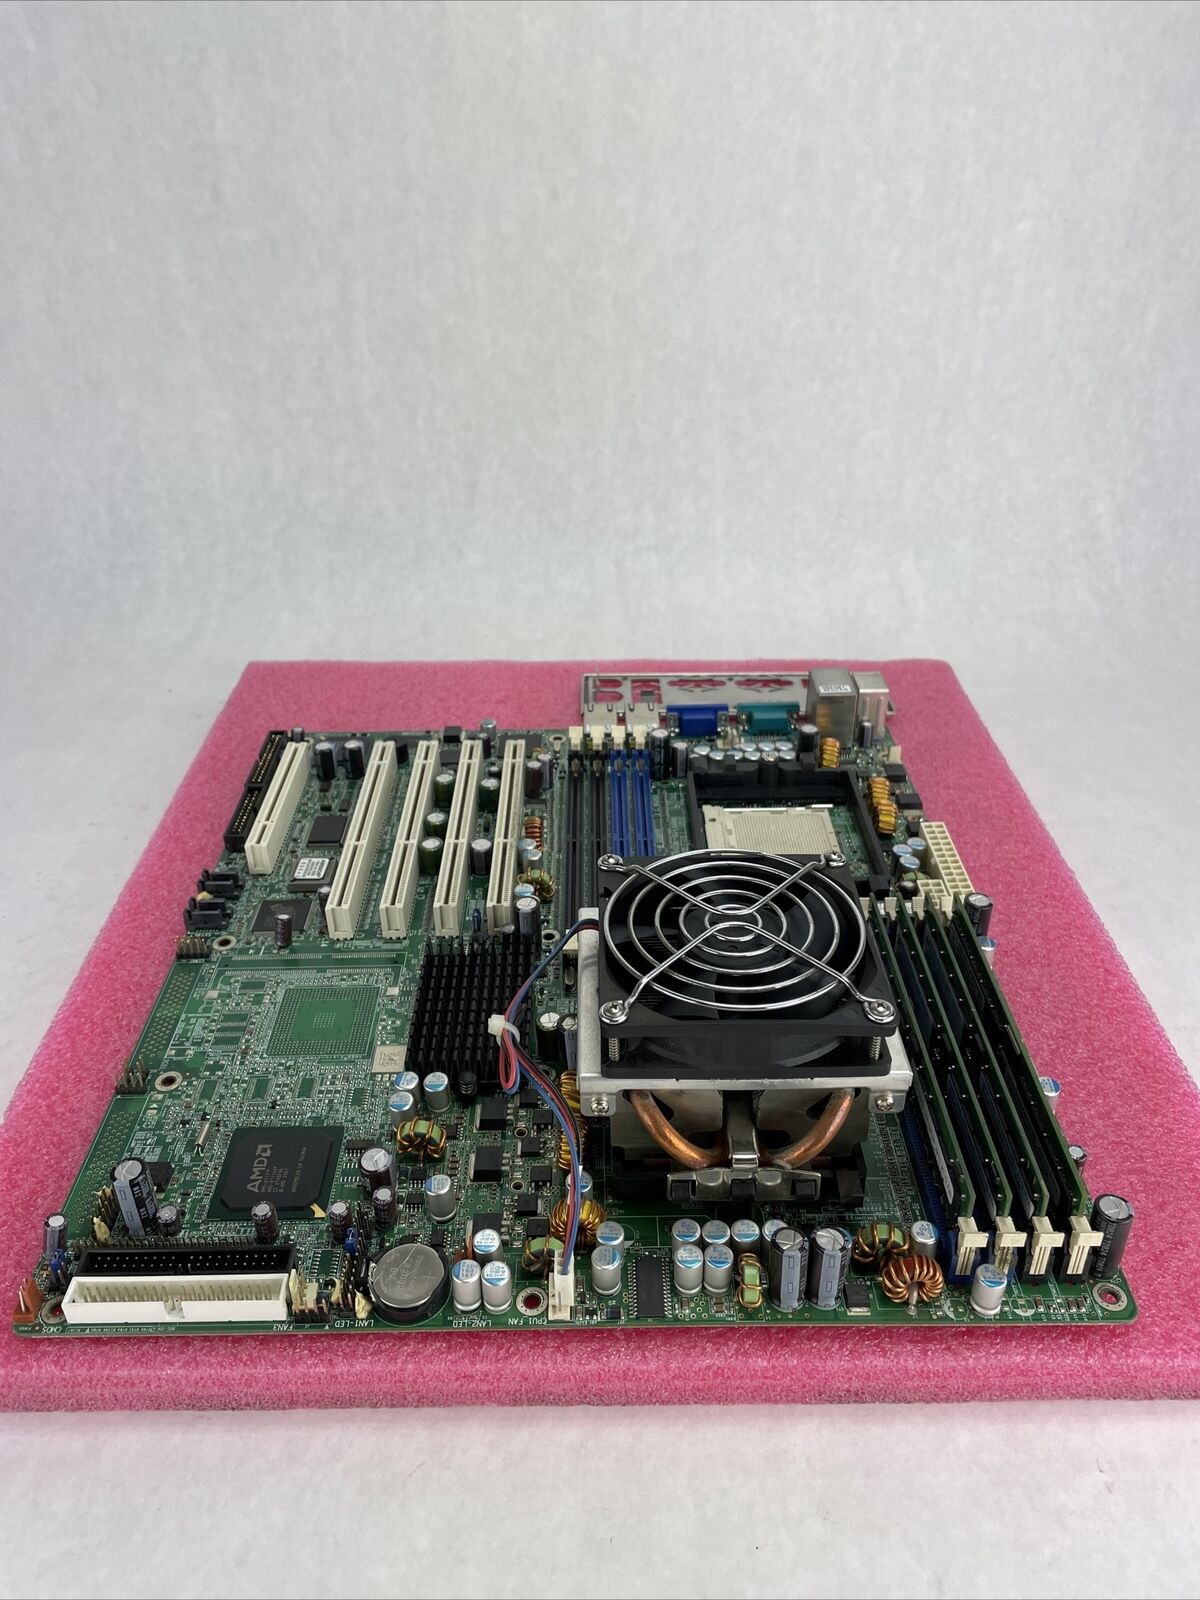 TYAN Thunder S2882-D Pro Motherboard AMD Opteron 285 2.6GHz 1GB RAM w/ Shield